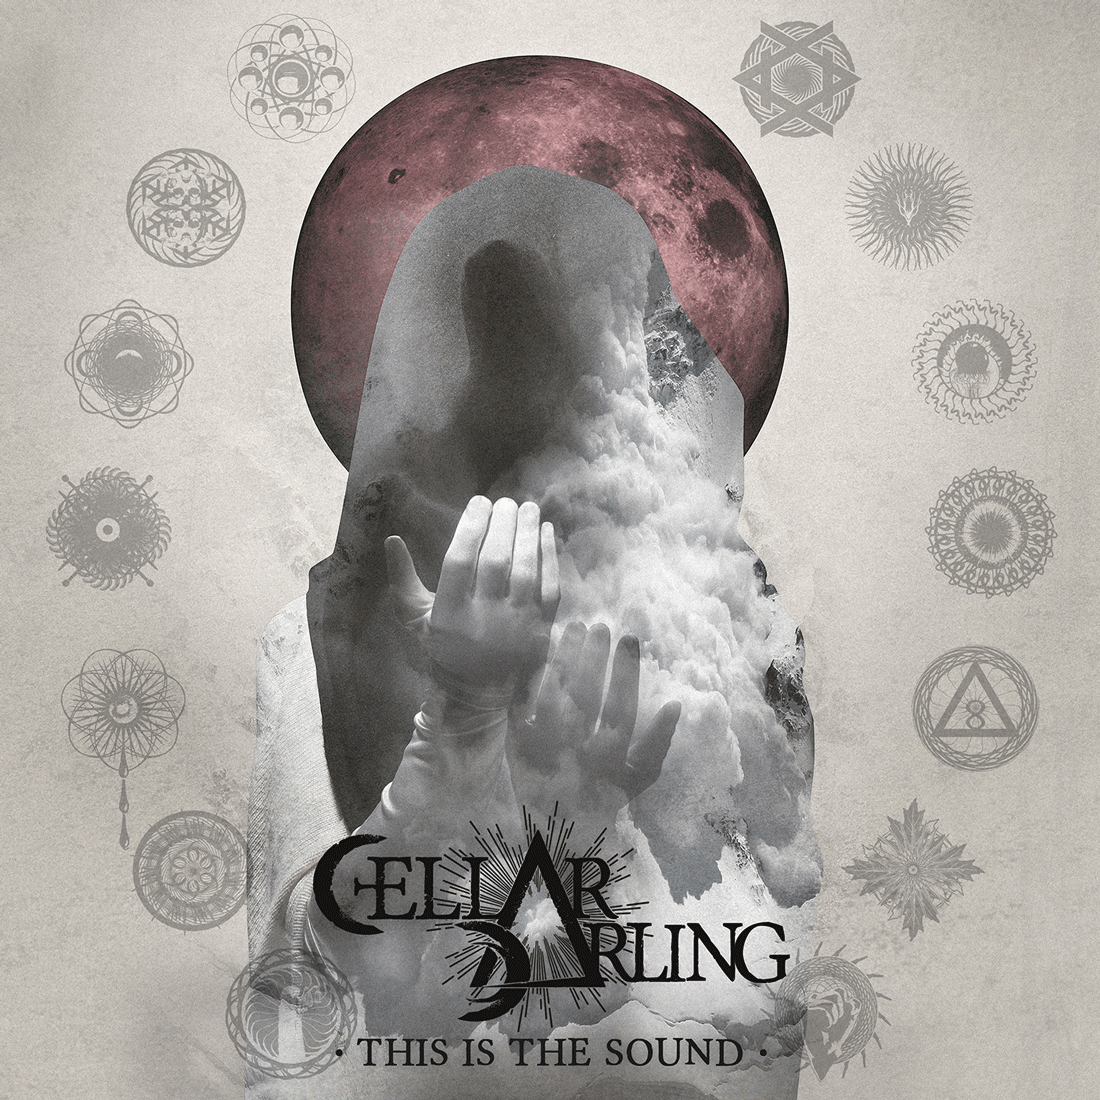 Cellar Darling - This Is The Sound: CD